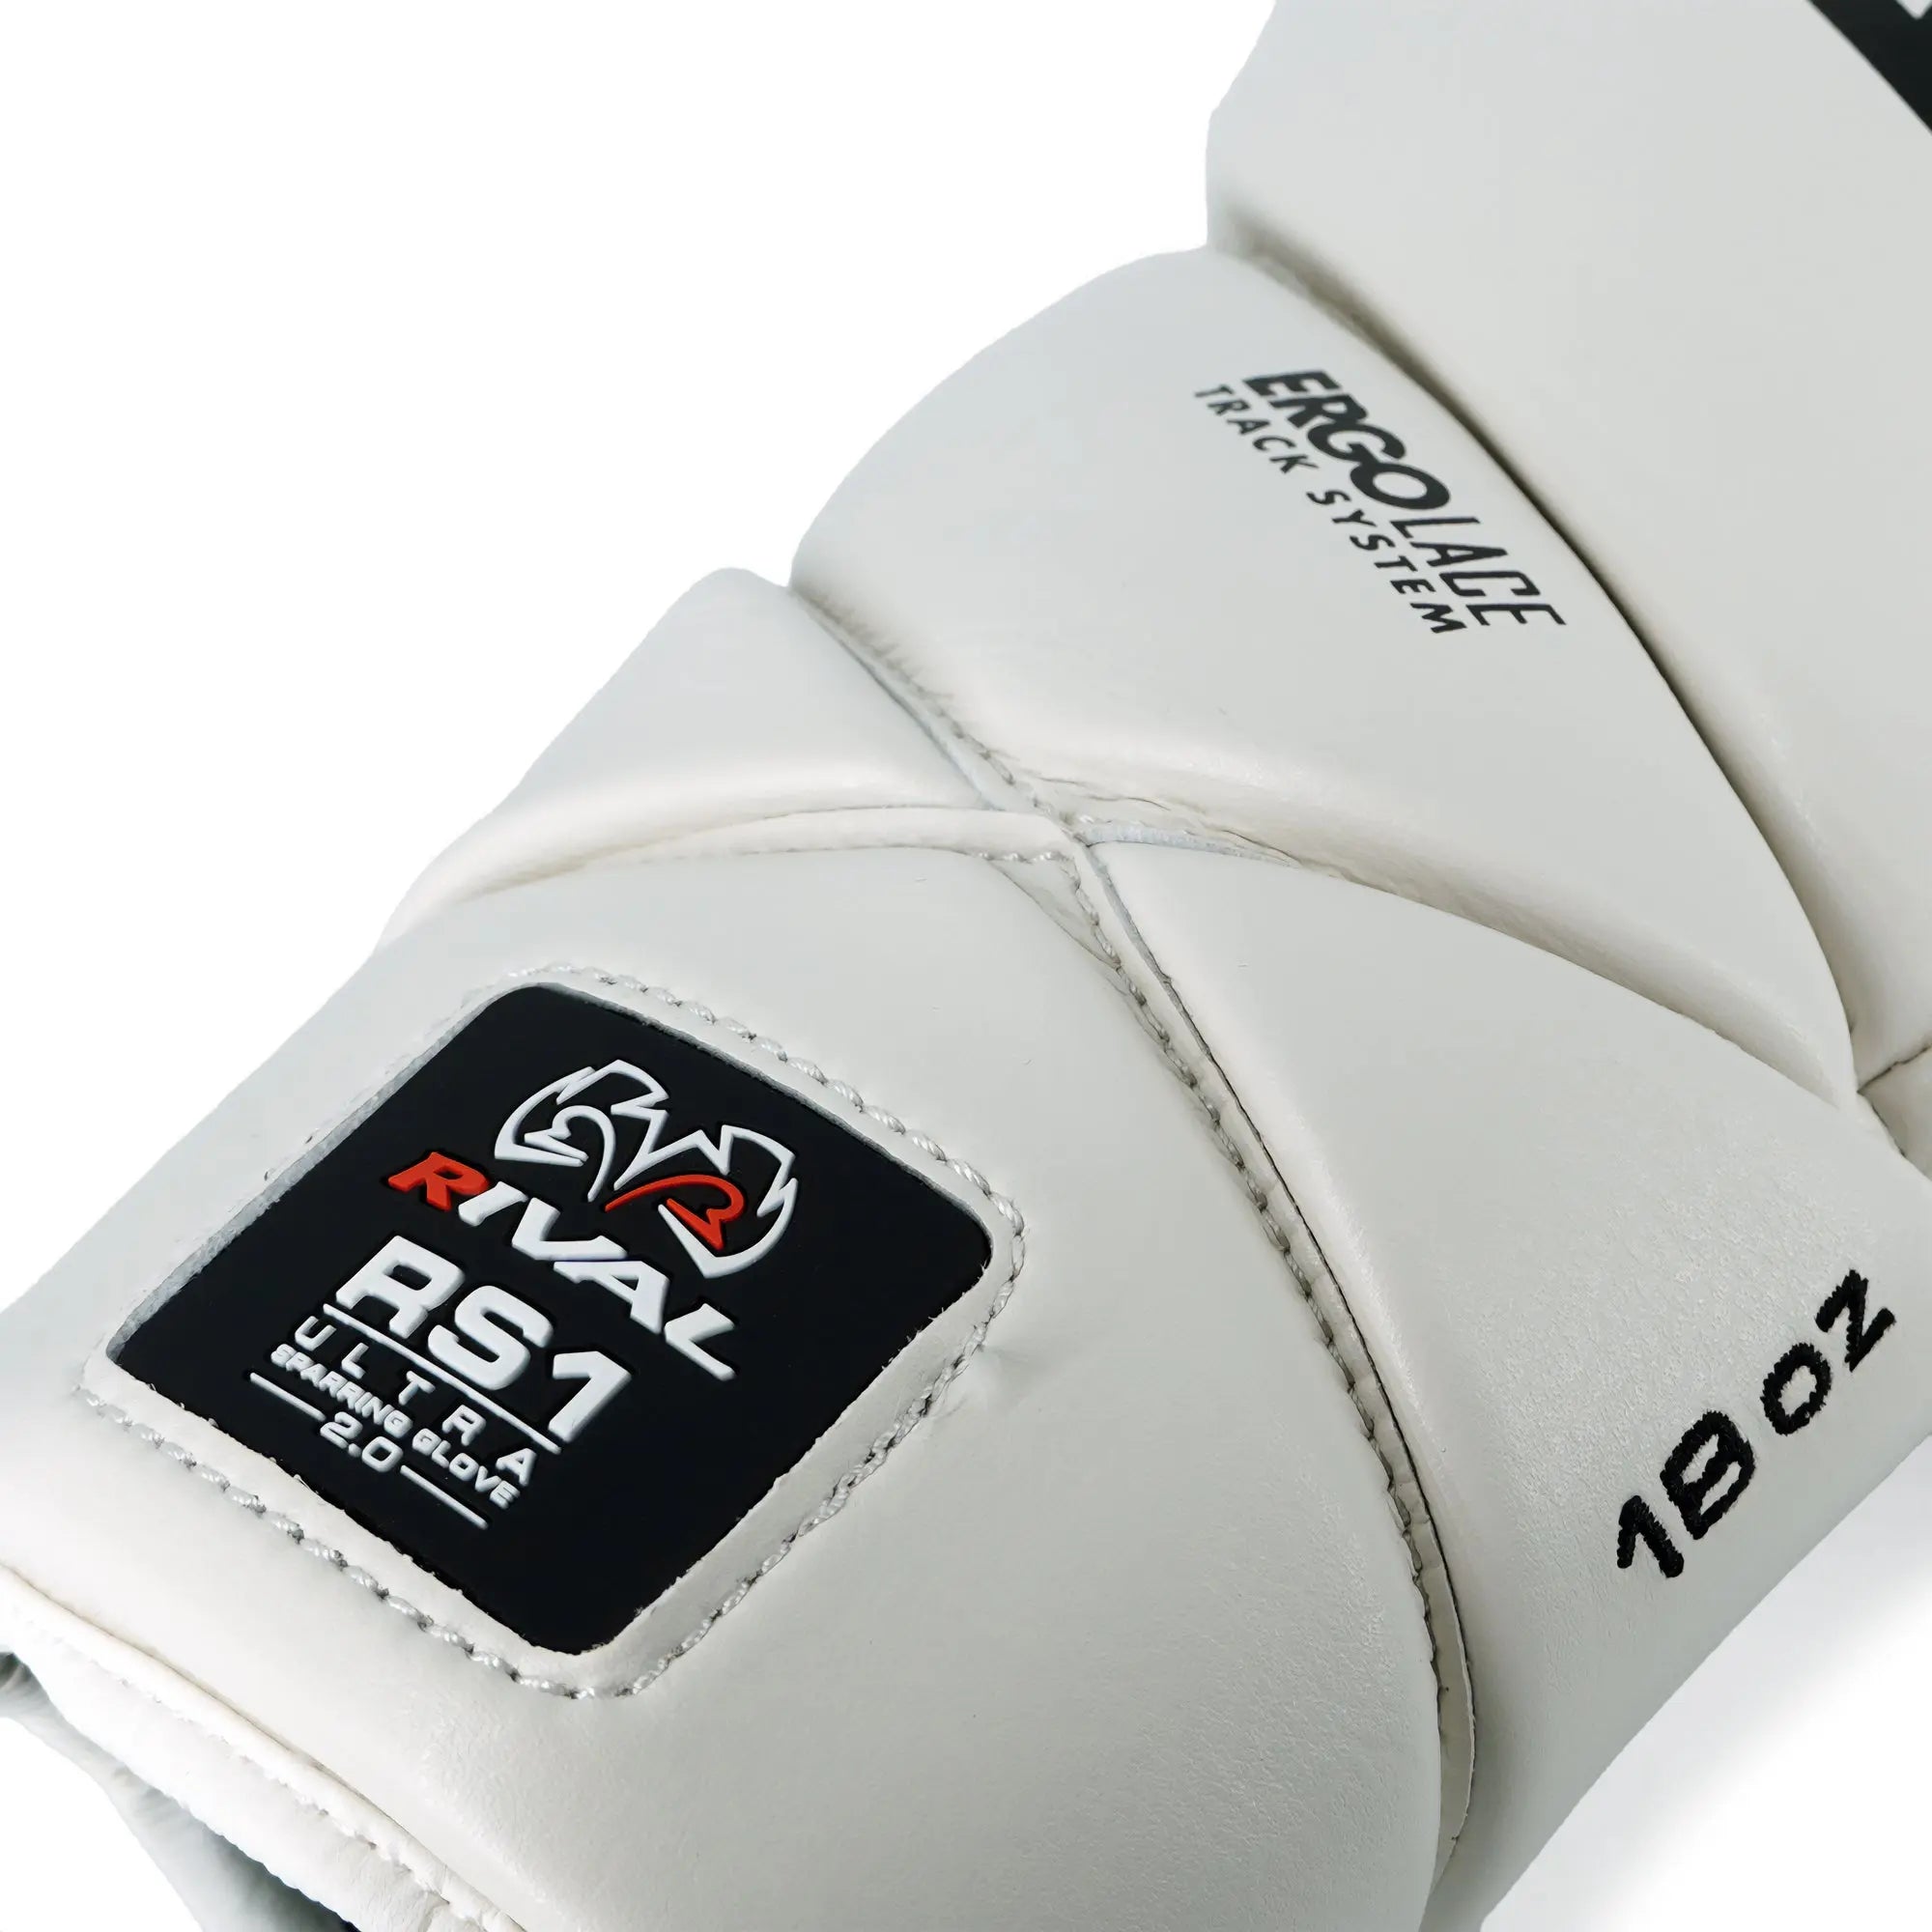 RIVAL Boxing RS1 2.0 Ultra Pro Lace-Up Sparring Gloves